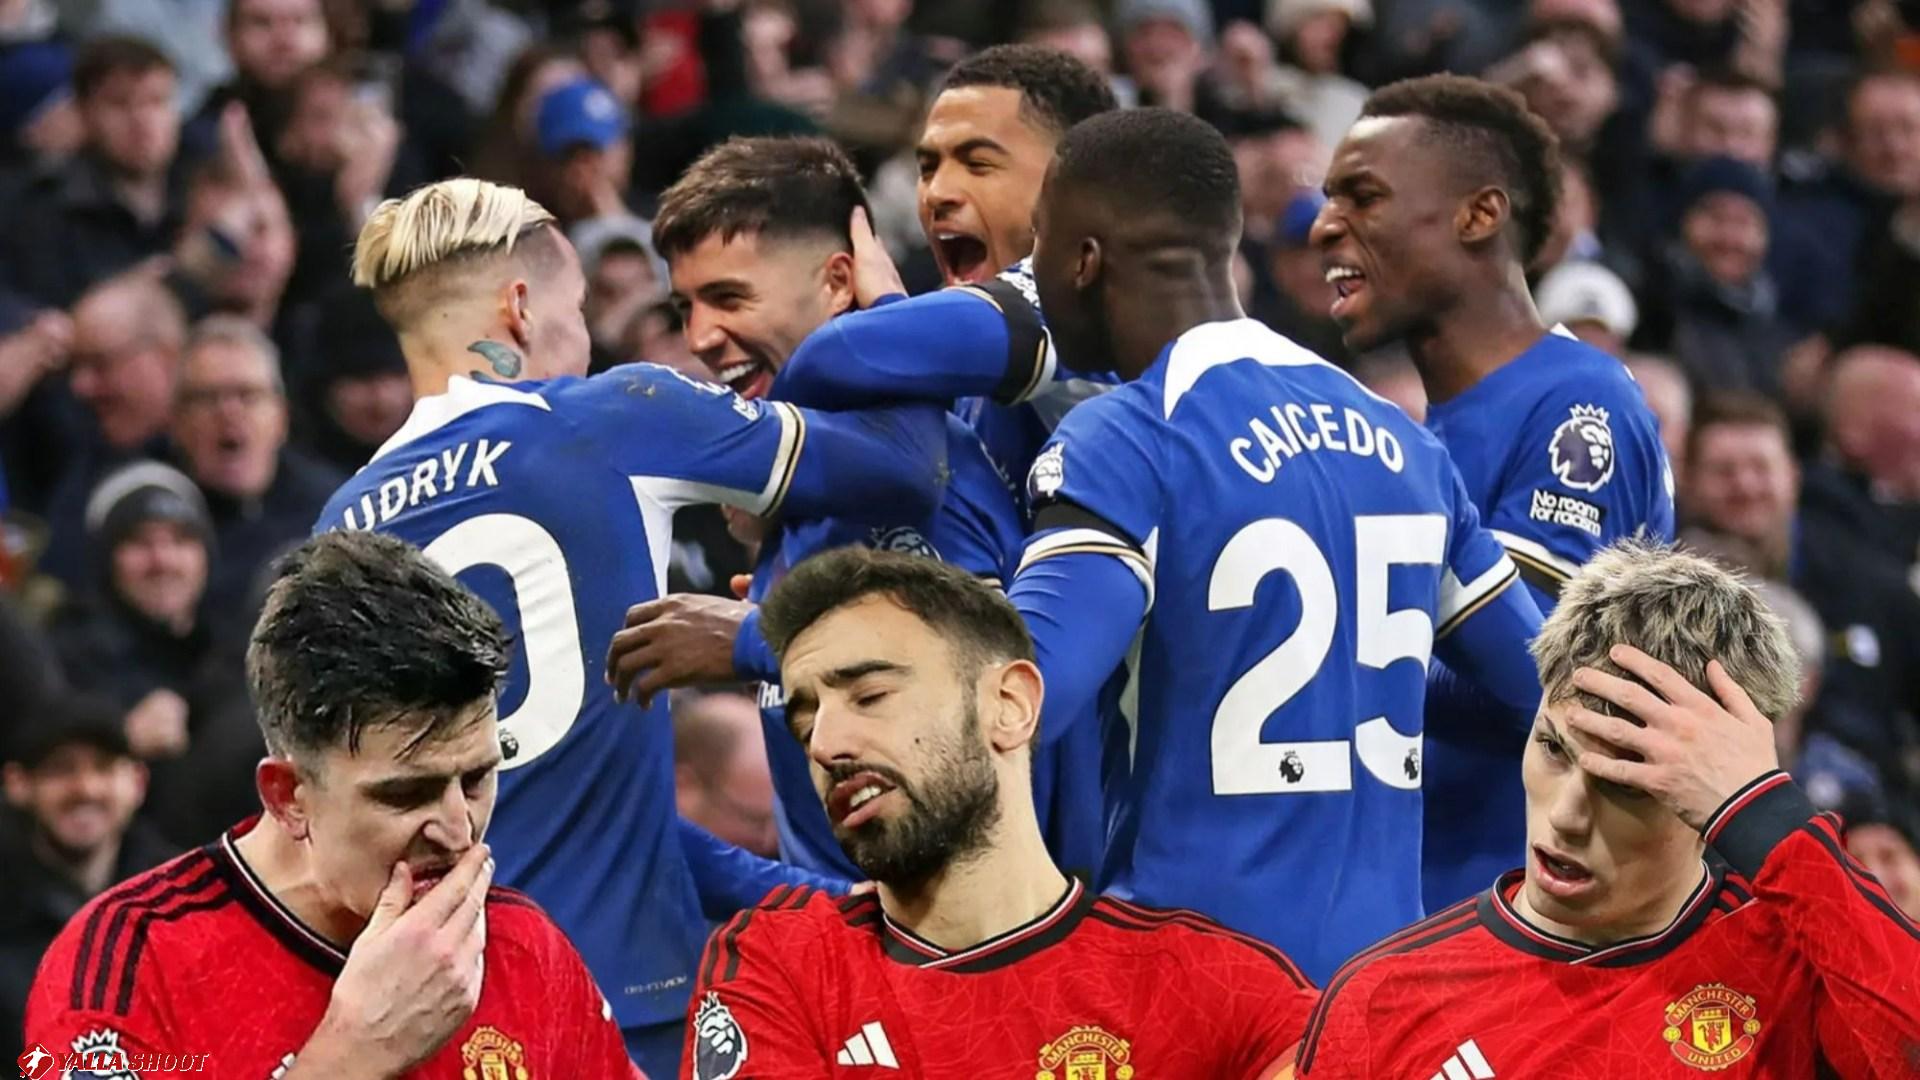 Horror stat shows just how bad Man Utd's season has been... and suggests Chelsea will make it EVEN WORSE